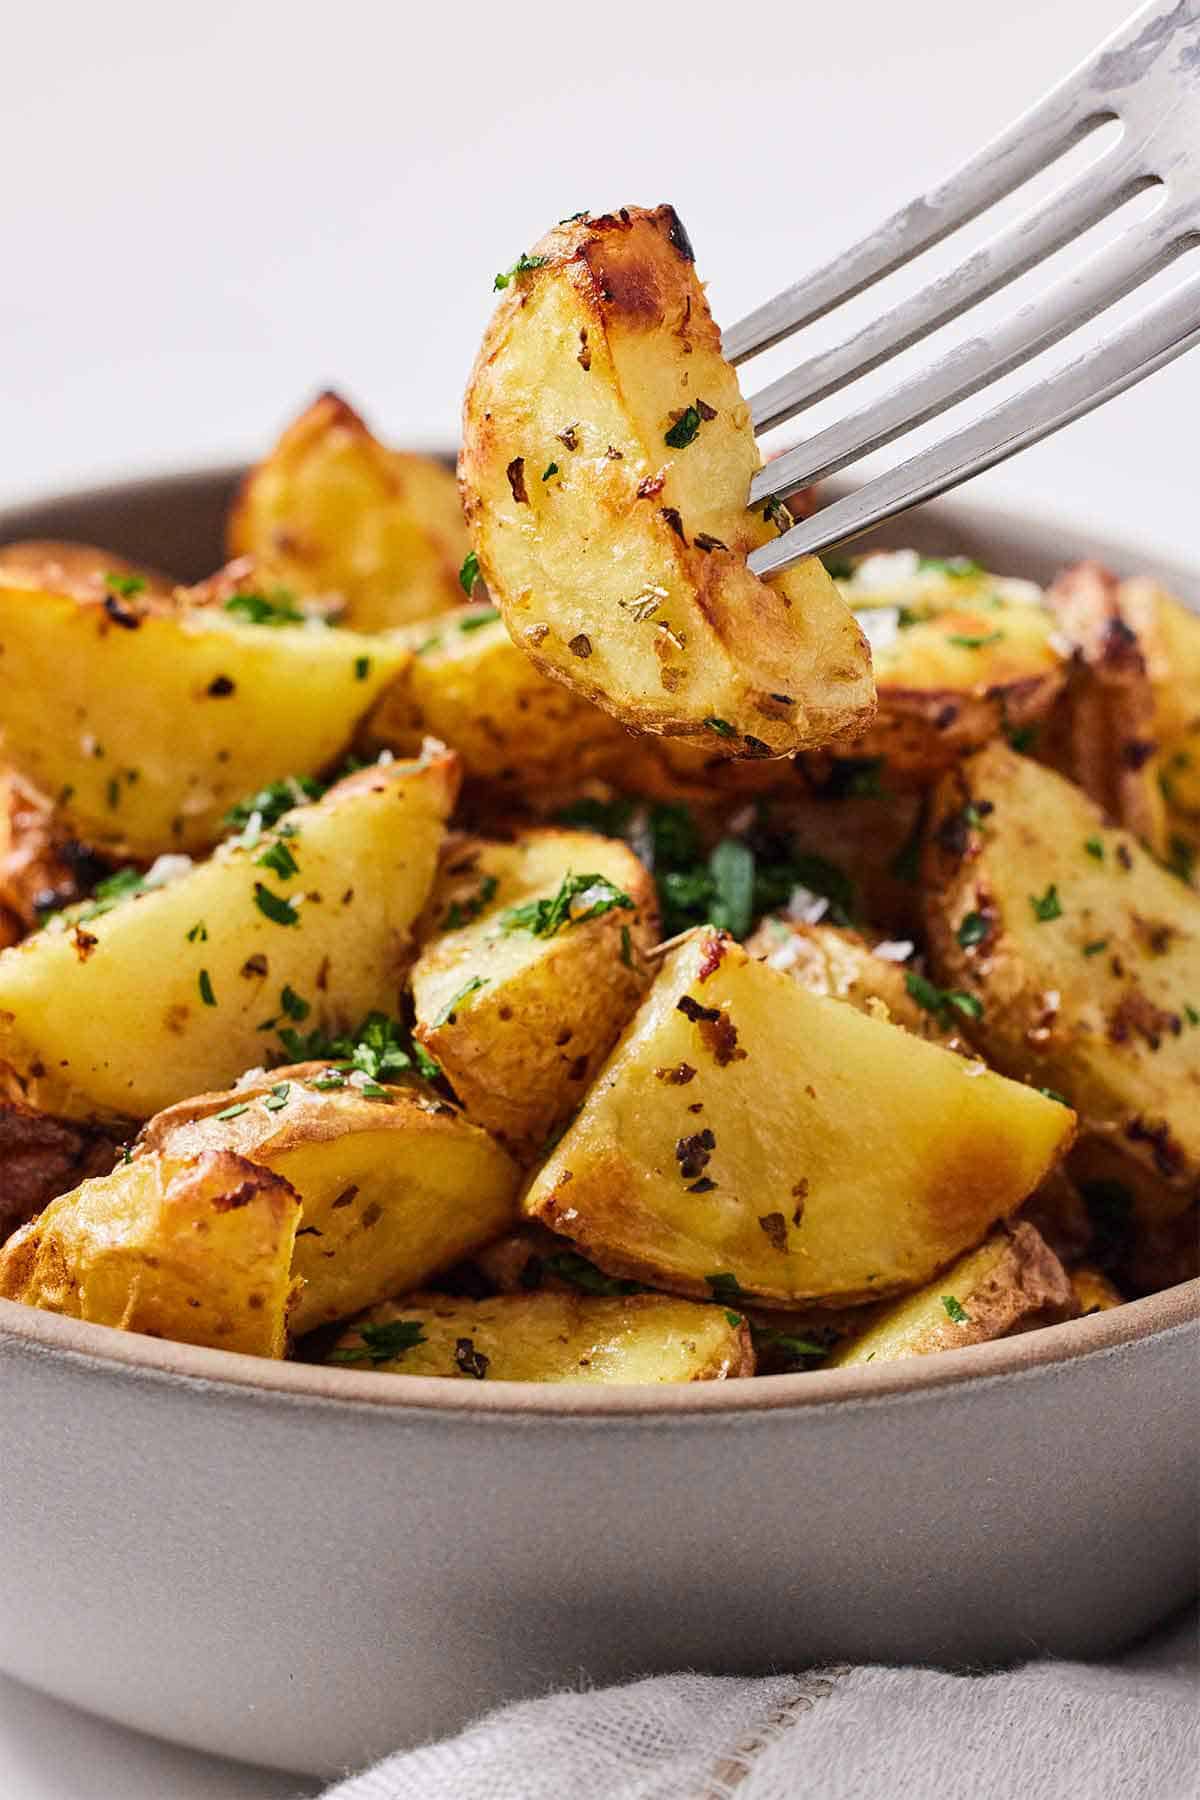 A fork lifting up a piece of air fryer Greek lemon potato from the bowl.